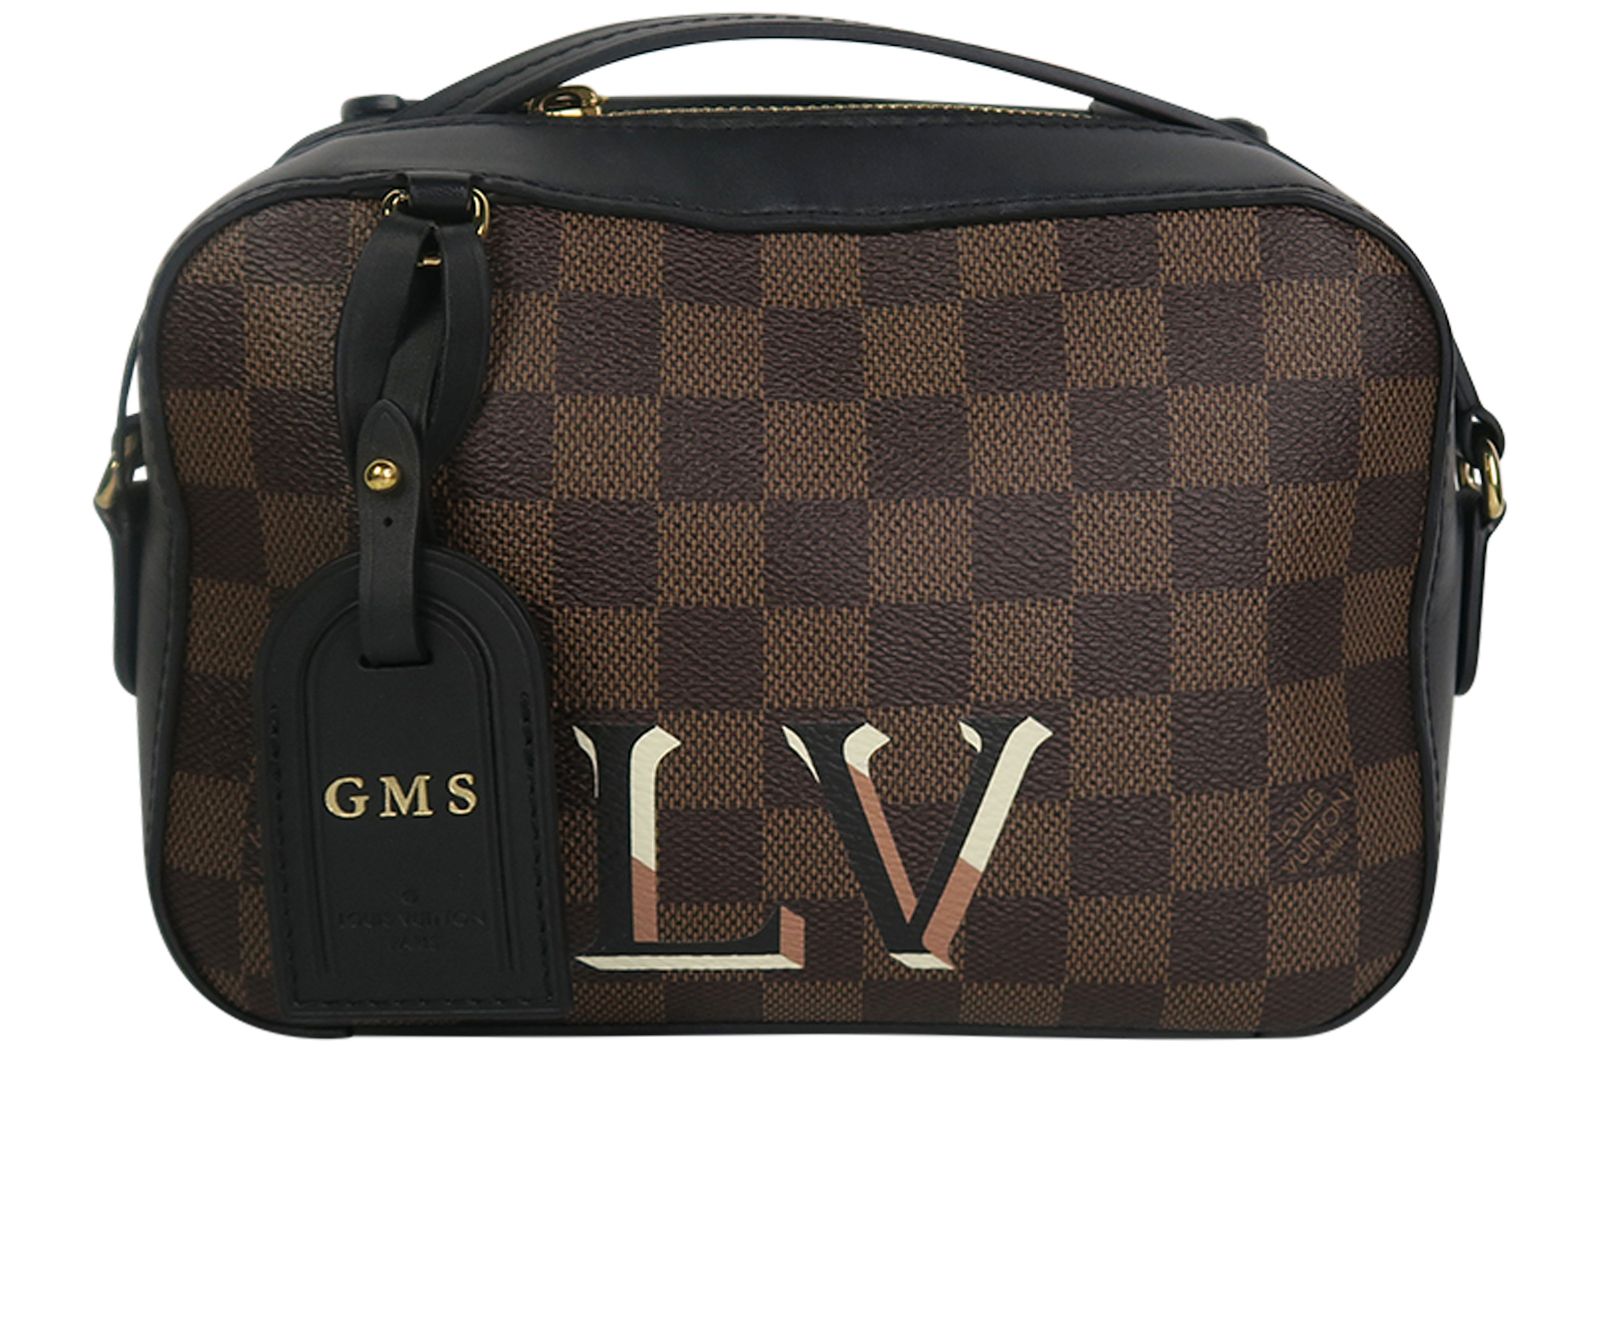 The Louis Vuitton Camera Bag is the Celebrity Accesory Pick For